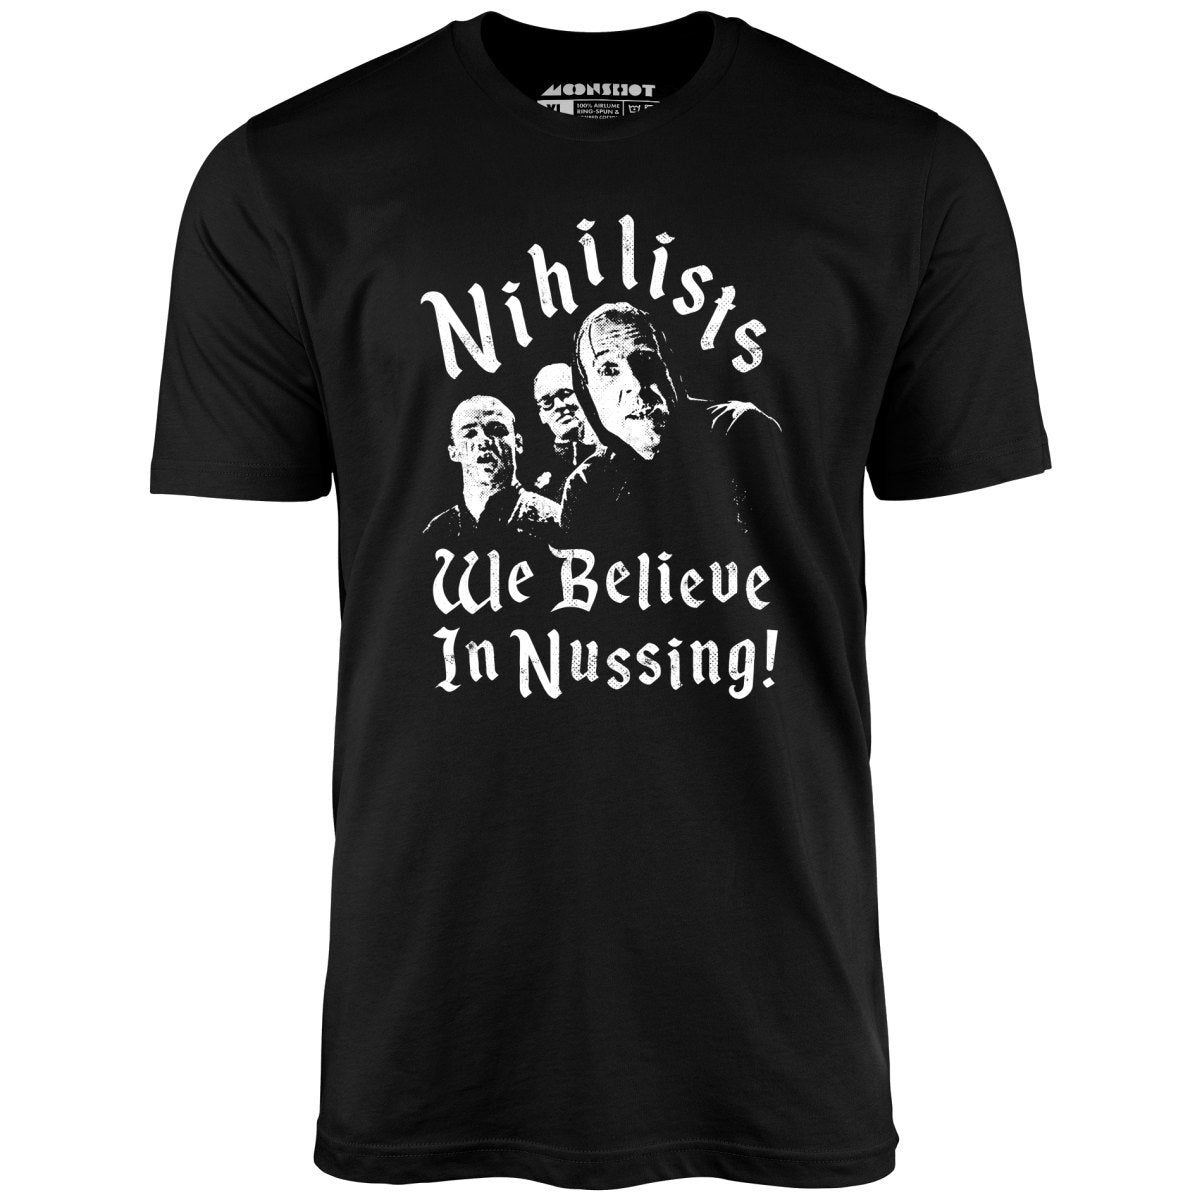 Nihilists - We Believe in Nussing - Unisex T-Shirt